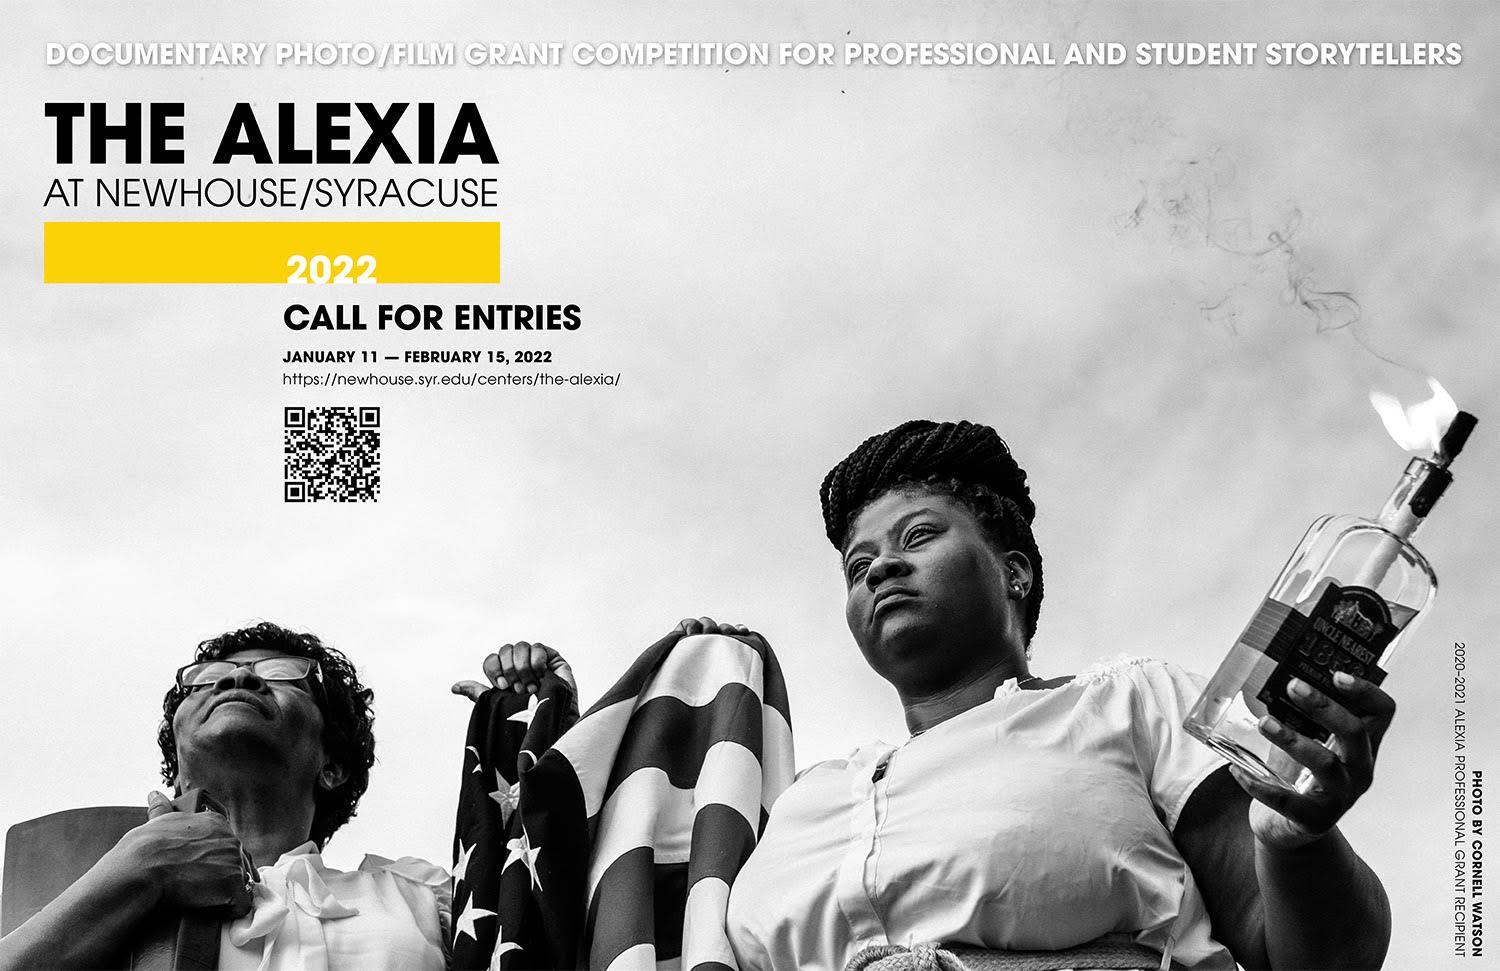 The deadline extended to submit to The Alexia 2022 Grants Competition